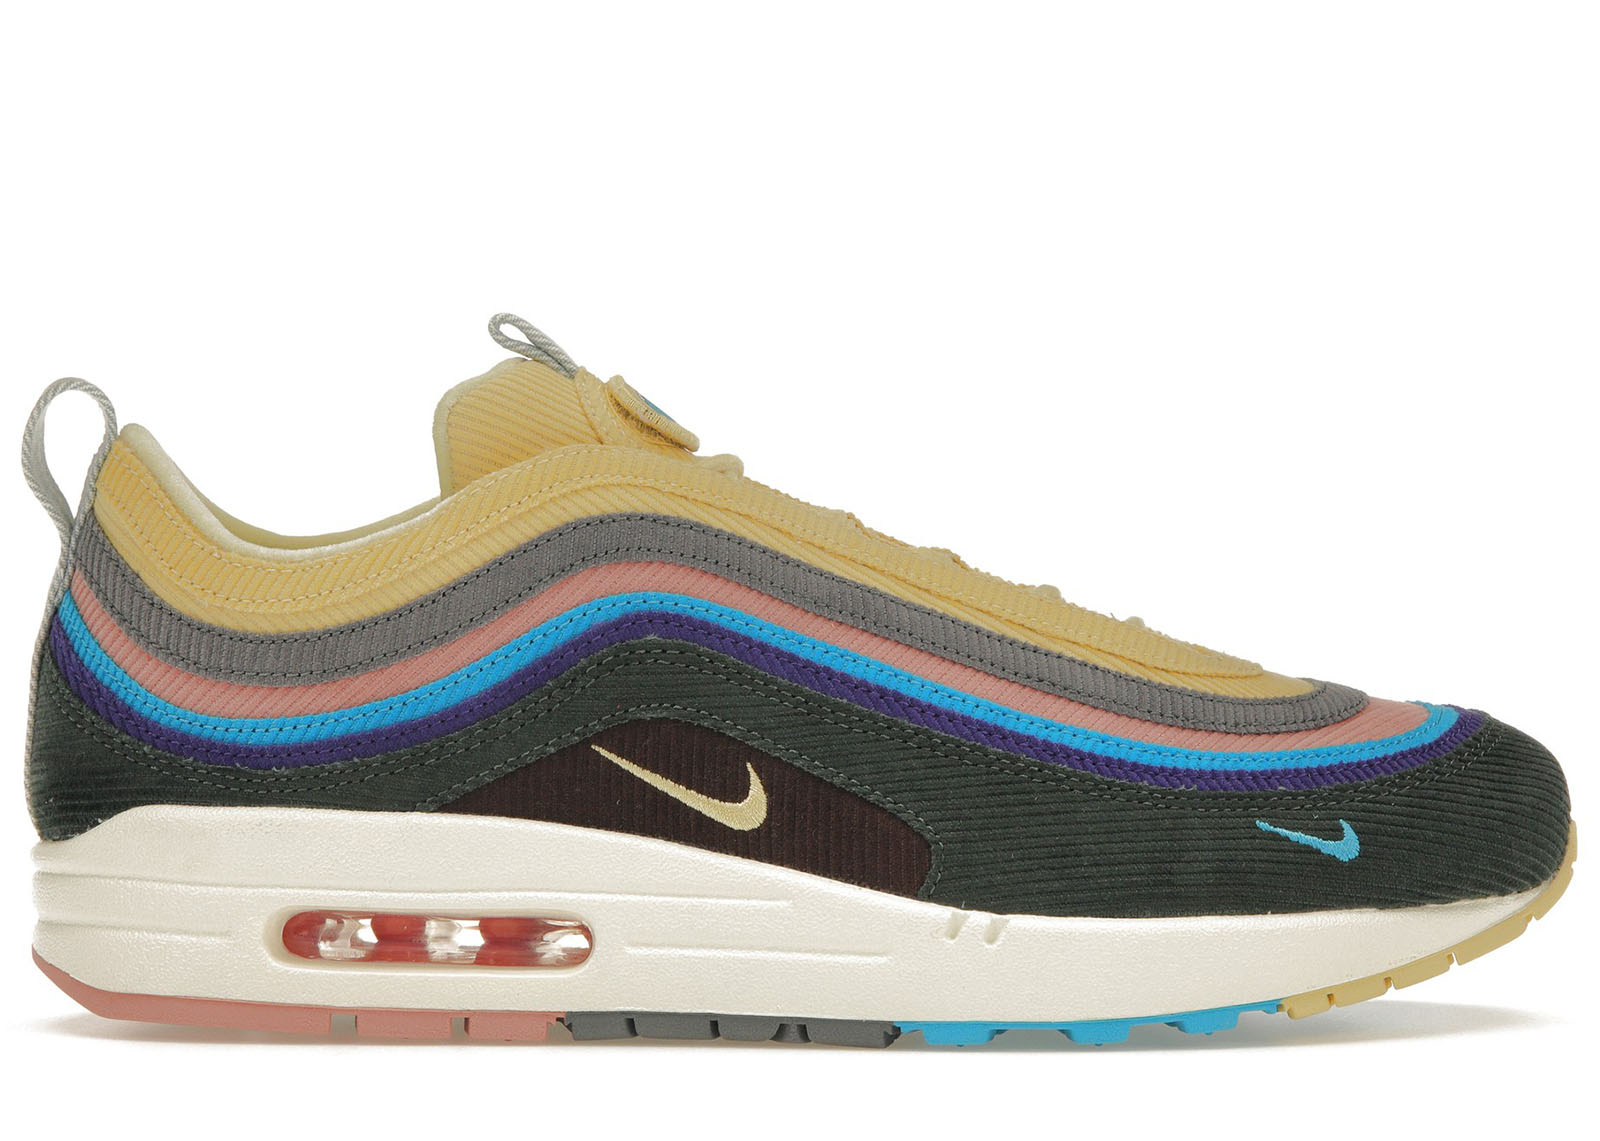 Nike Air Max 97 Shoes - Average Sale Price